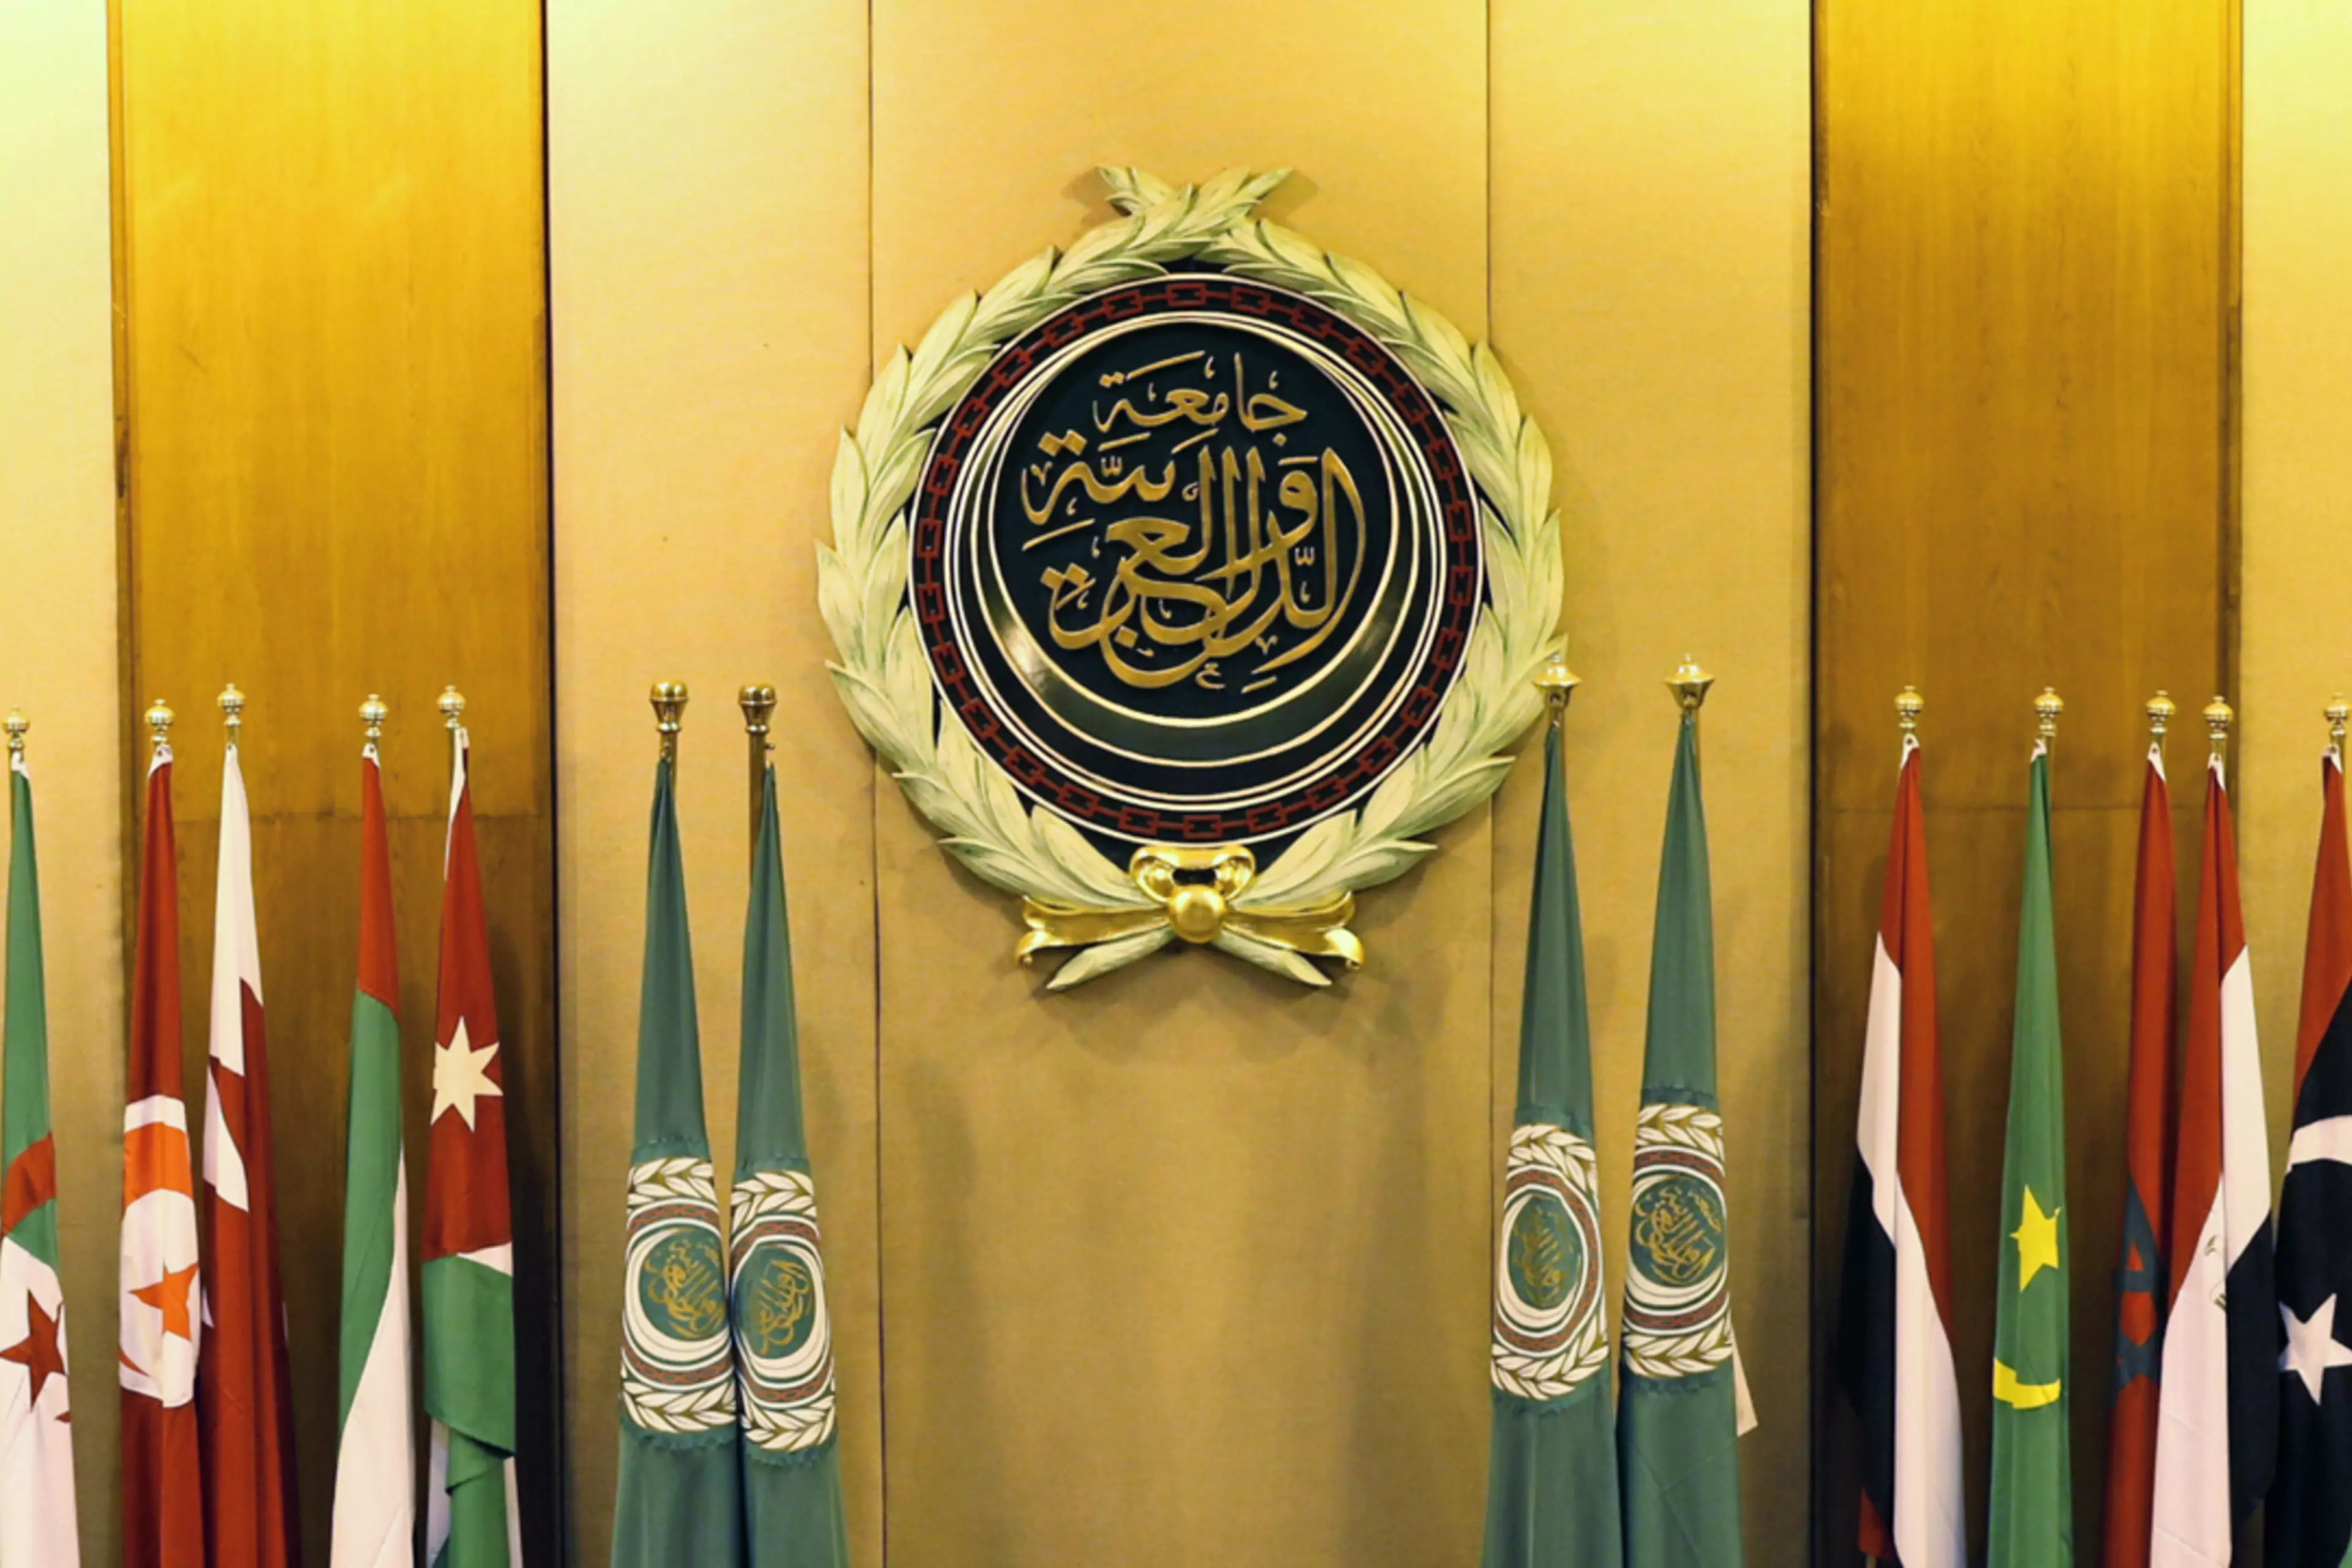 Deletes meet for  the annual meeting at the Arab League headquarters in Cairo in 2016.